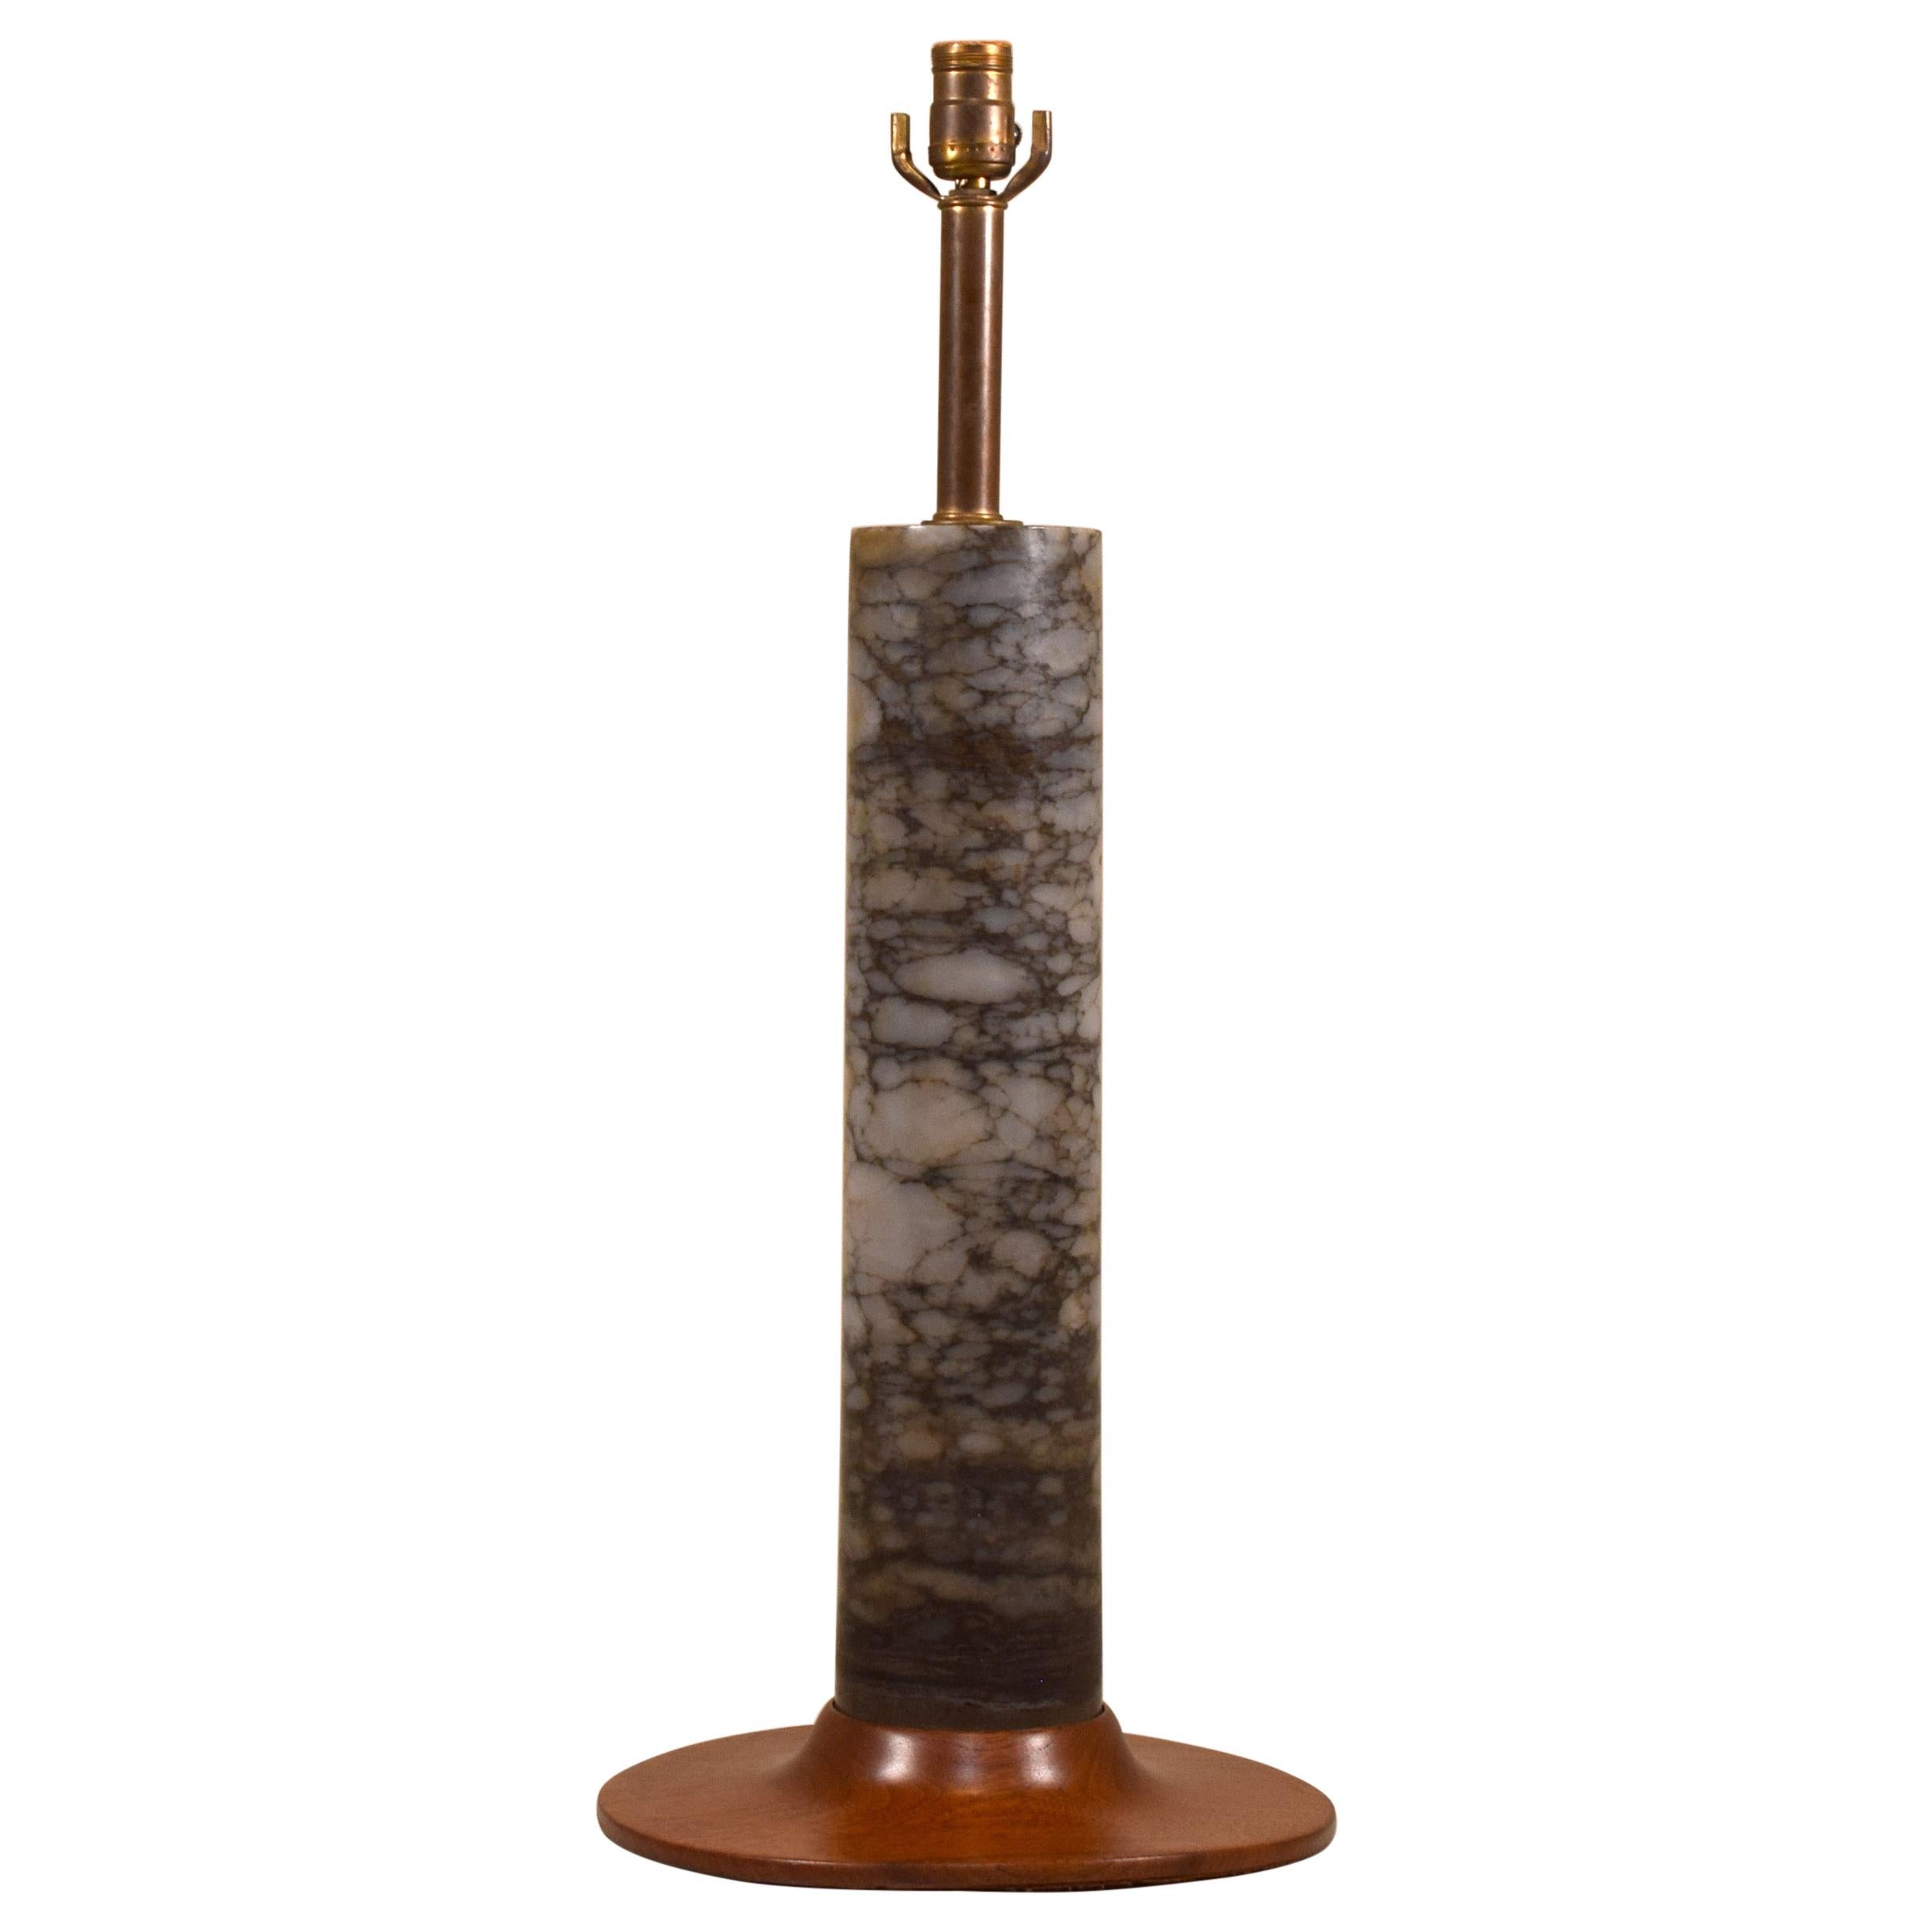 Large Oil Well Castile Formation Core Sample Table Lamp